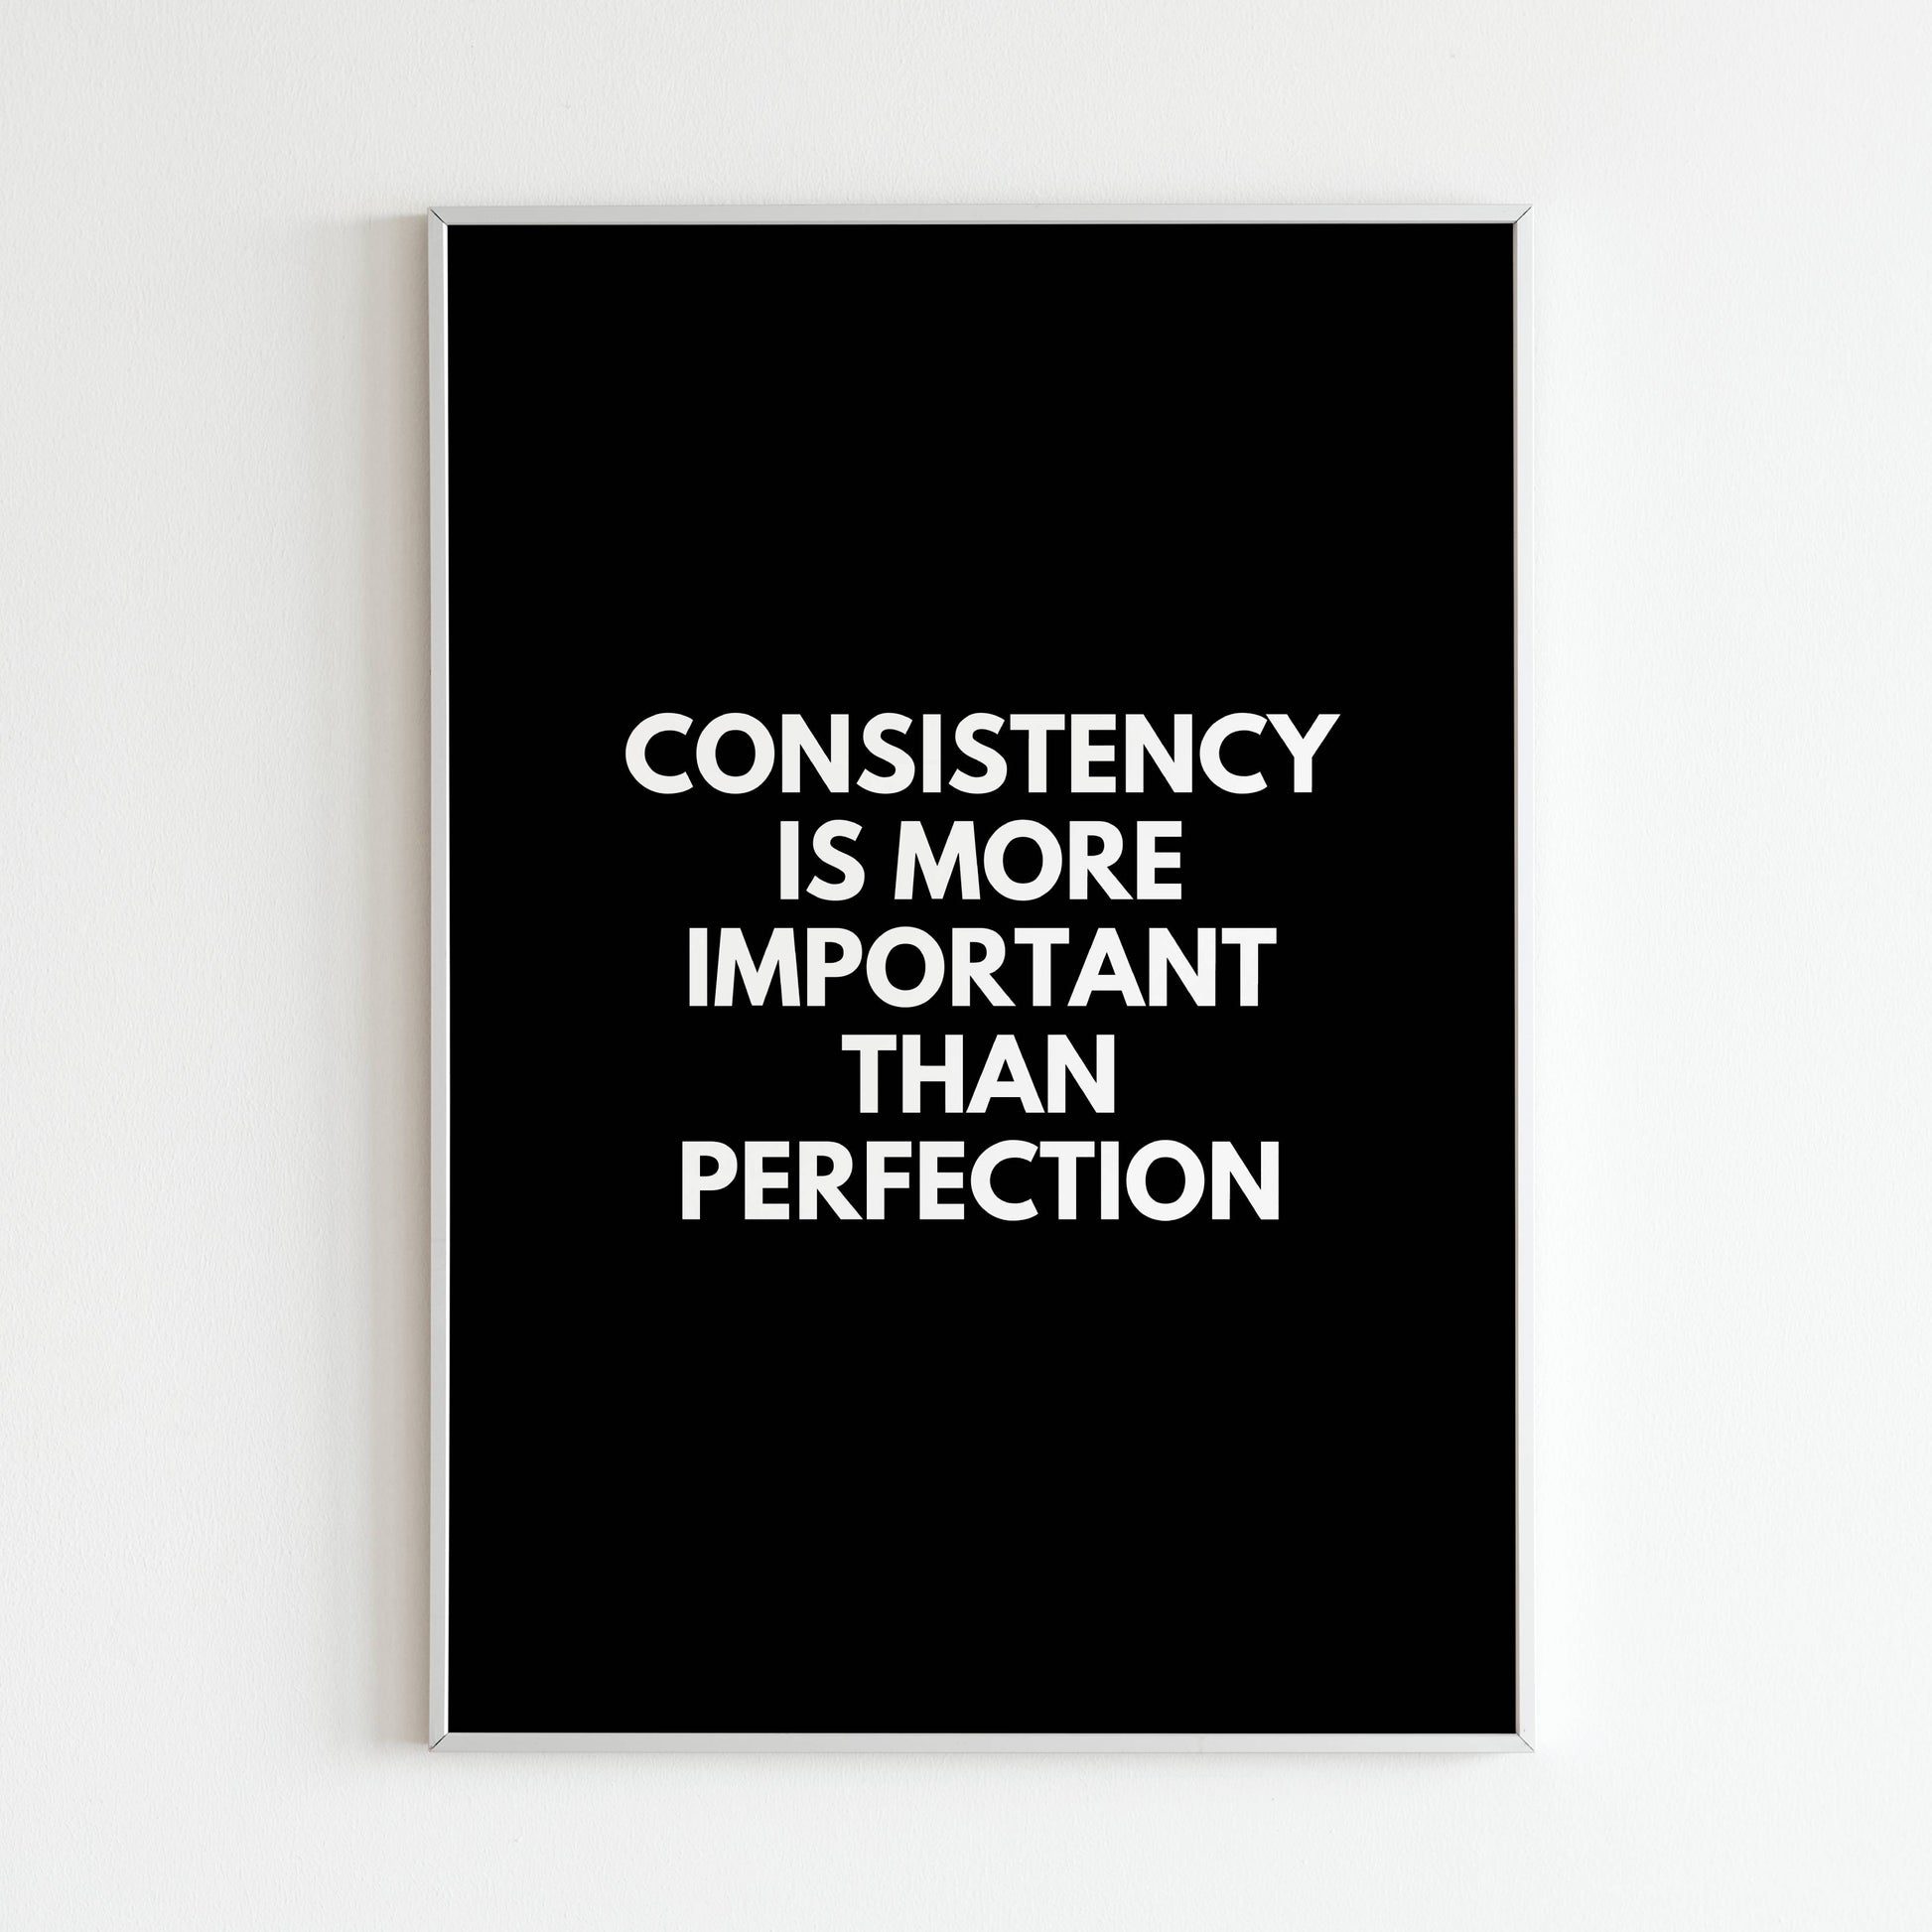 "Consistency is more important than perfection" - Printed Wall Art / Poster. This inspiring message encourages perseverance. Arrives ready to hang.